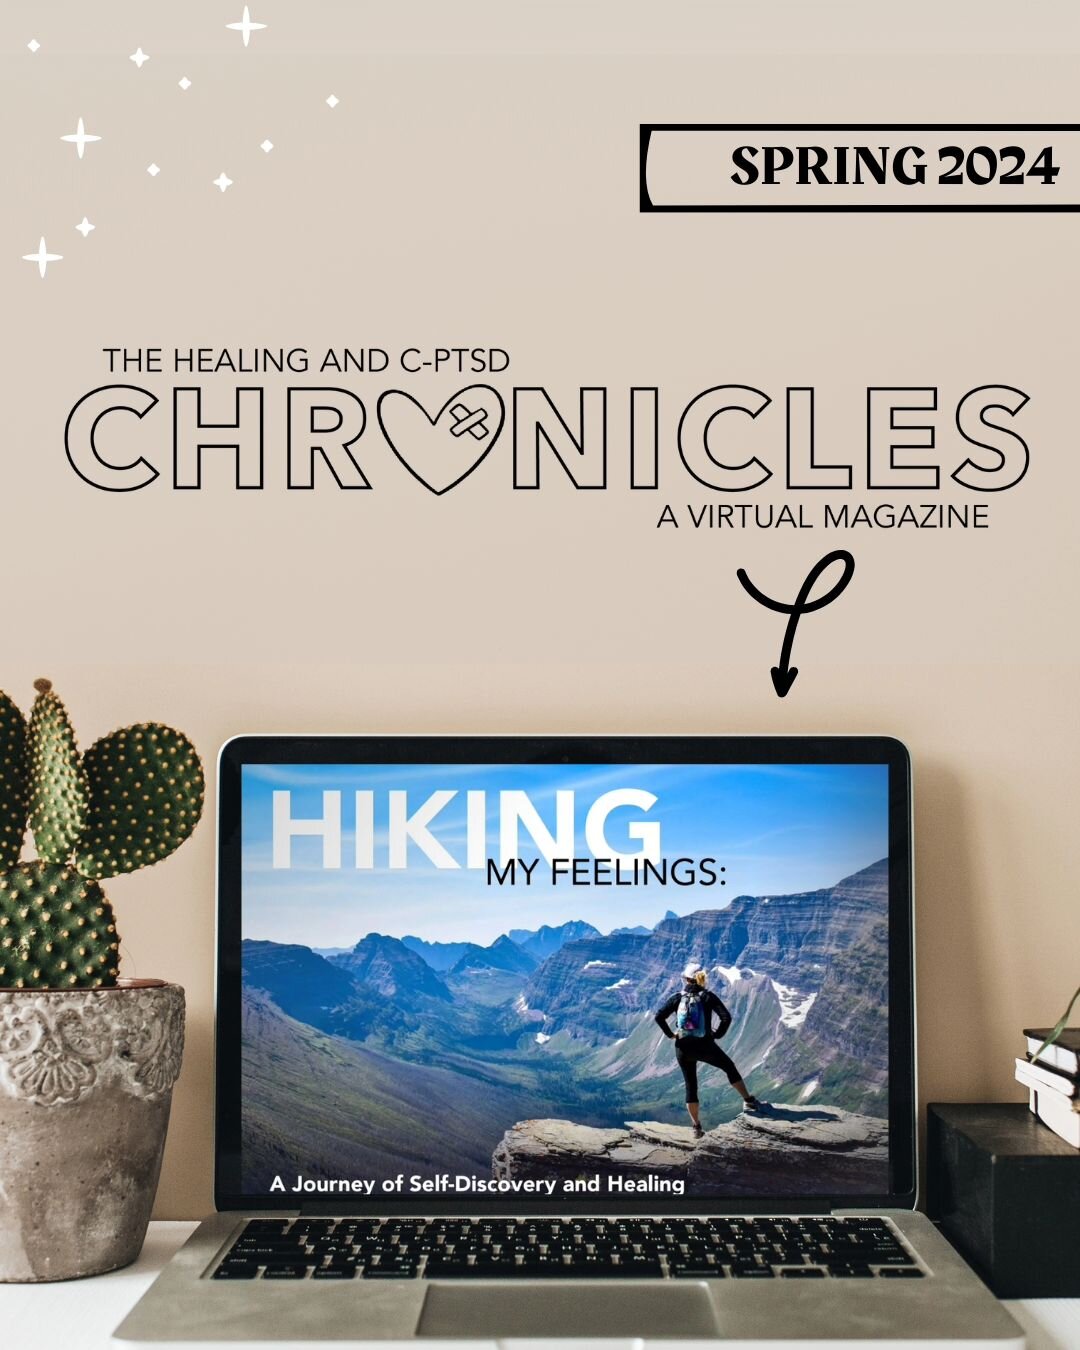 🎉 Have you read the @healing.and.cptsd Chronicles yet?

As if this week wasn't exciting enough with the big release of Hiking Your Feelings on Tuesday, we are so stoked to share this incredible resource from @complex.dani, founder of @healing.and.cp